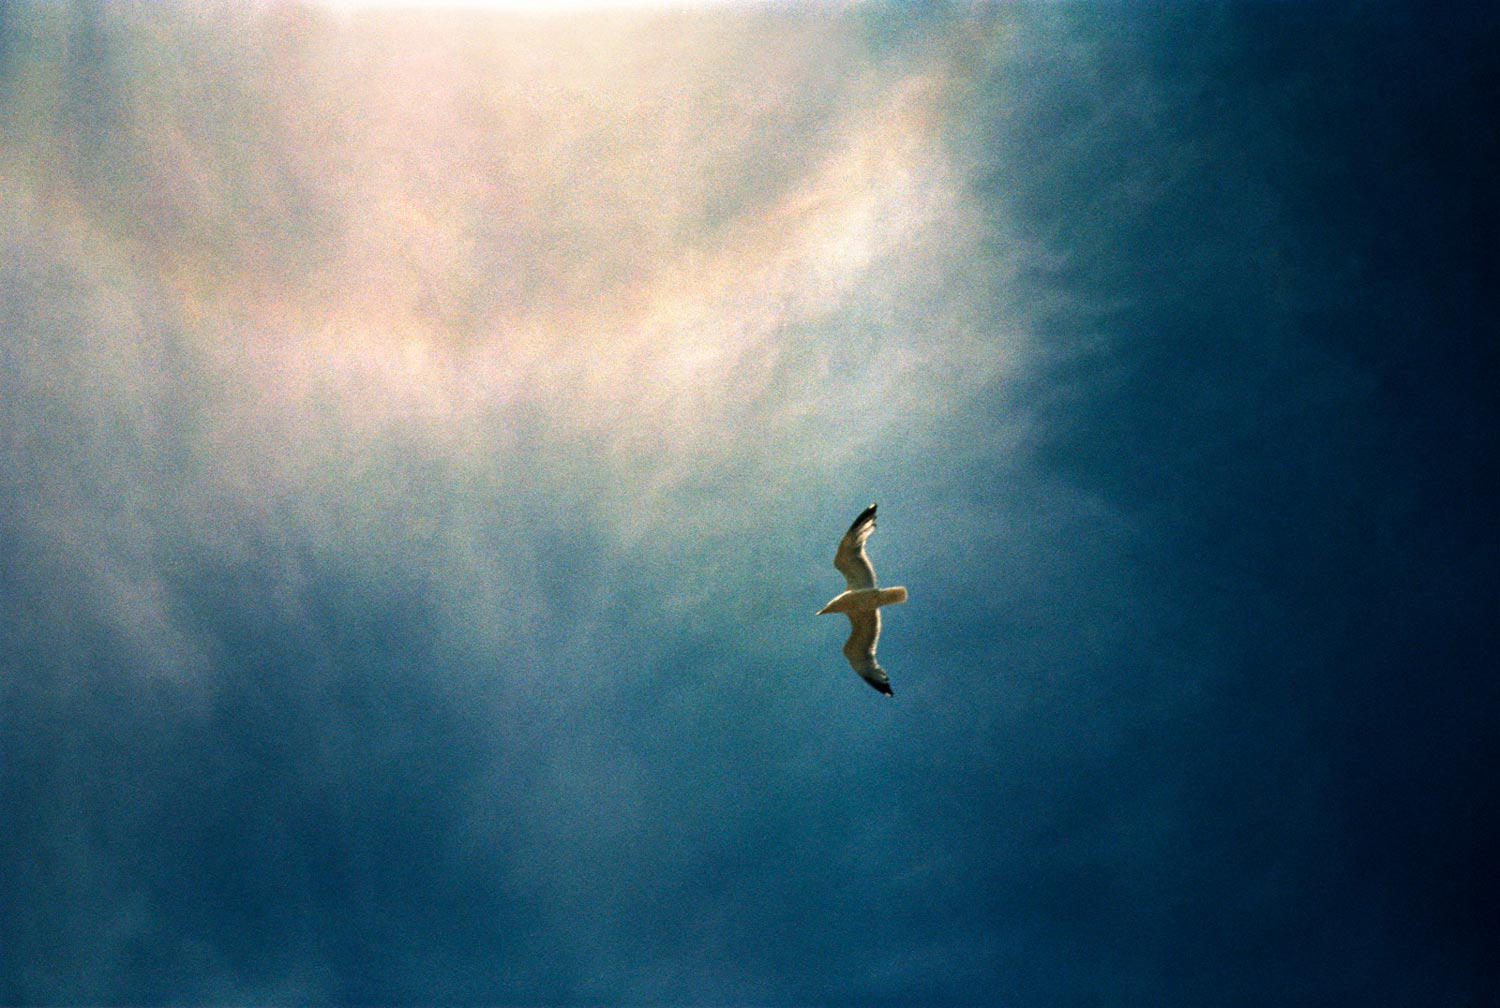 Seagull flying close to the sun.